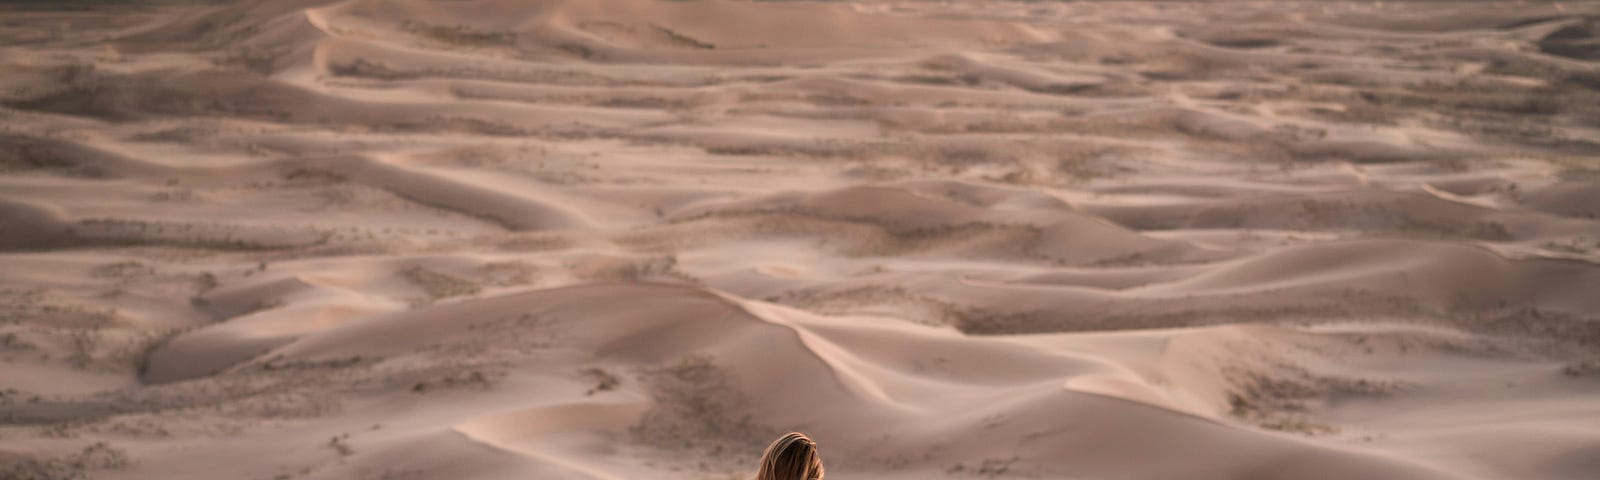 A women sitting in a desert, either at day break or dusk